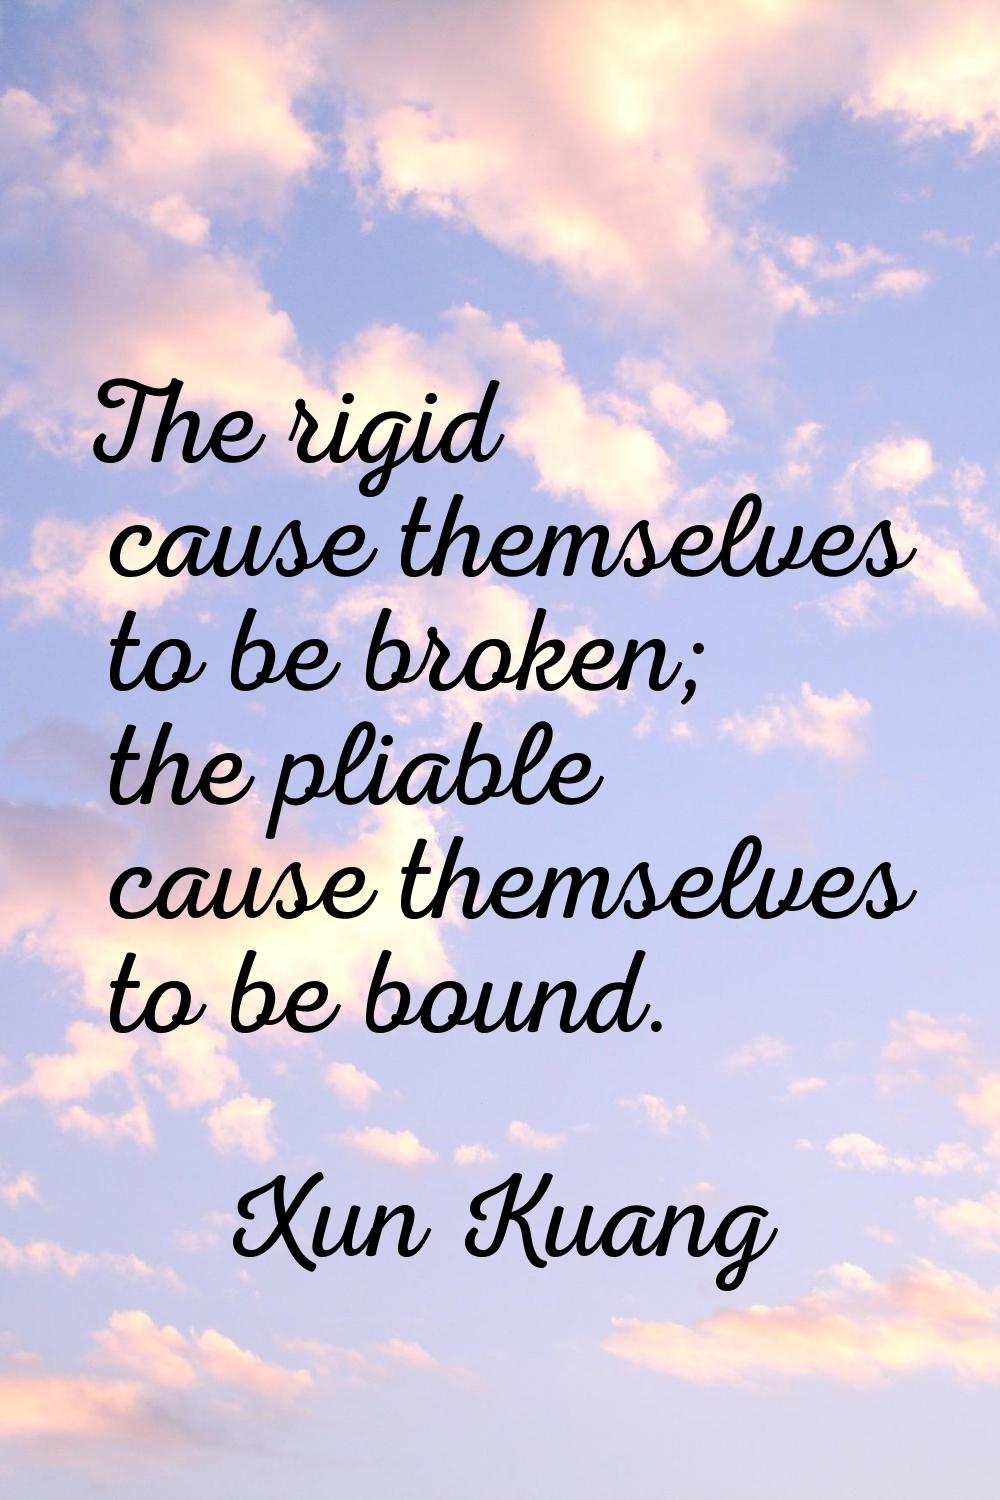 The rigid cause themselves to be broken; the pliable cause themselves to be bound.